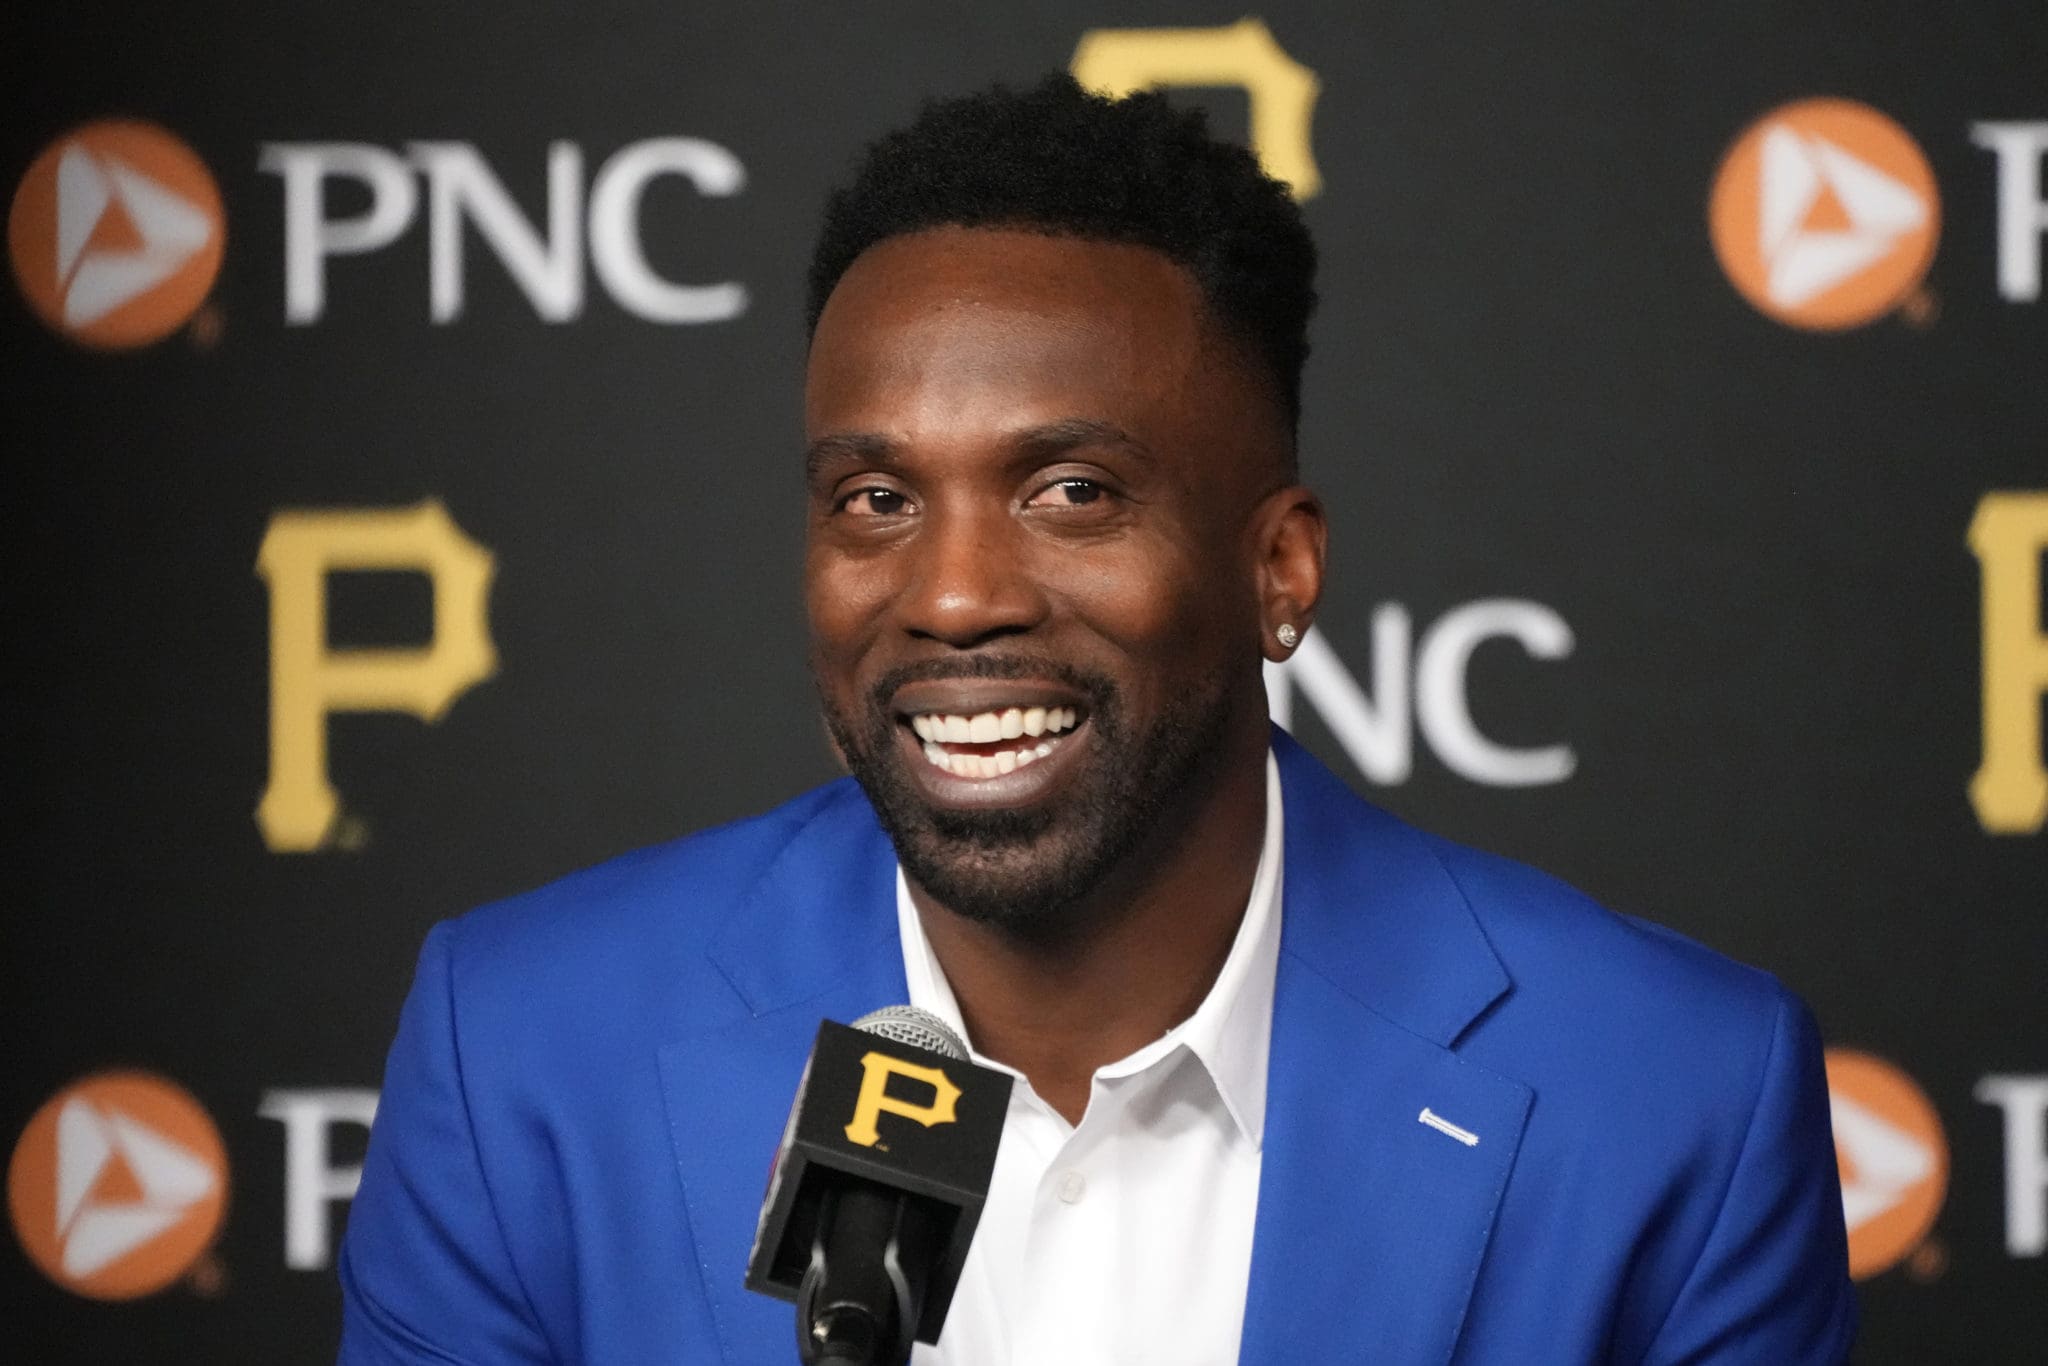 Yankees officially acquire Andrew McCutchen from Giants